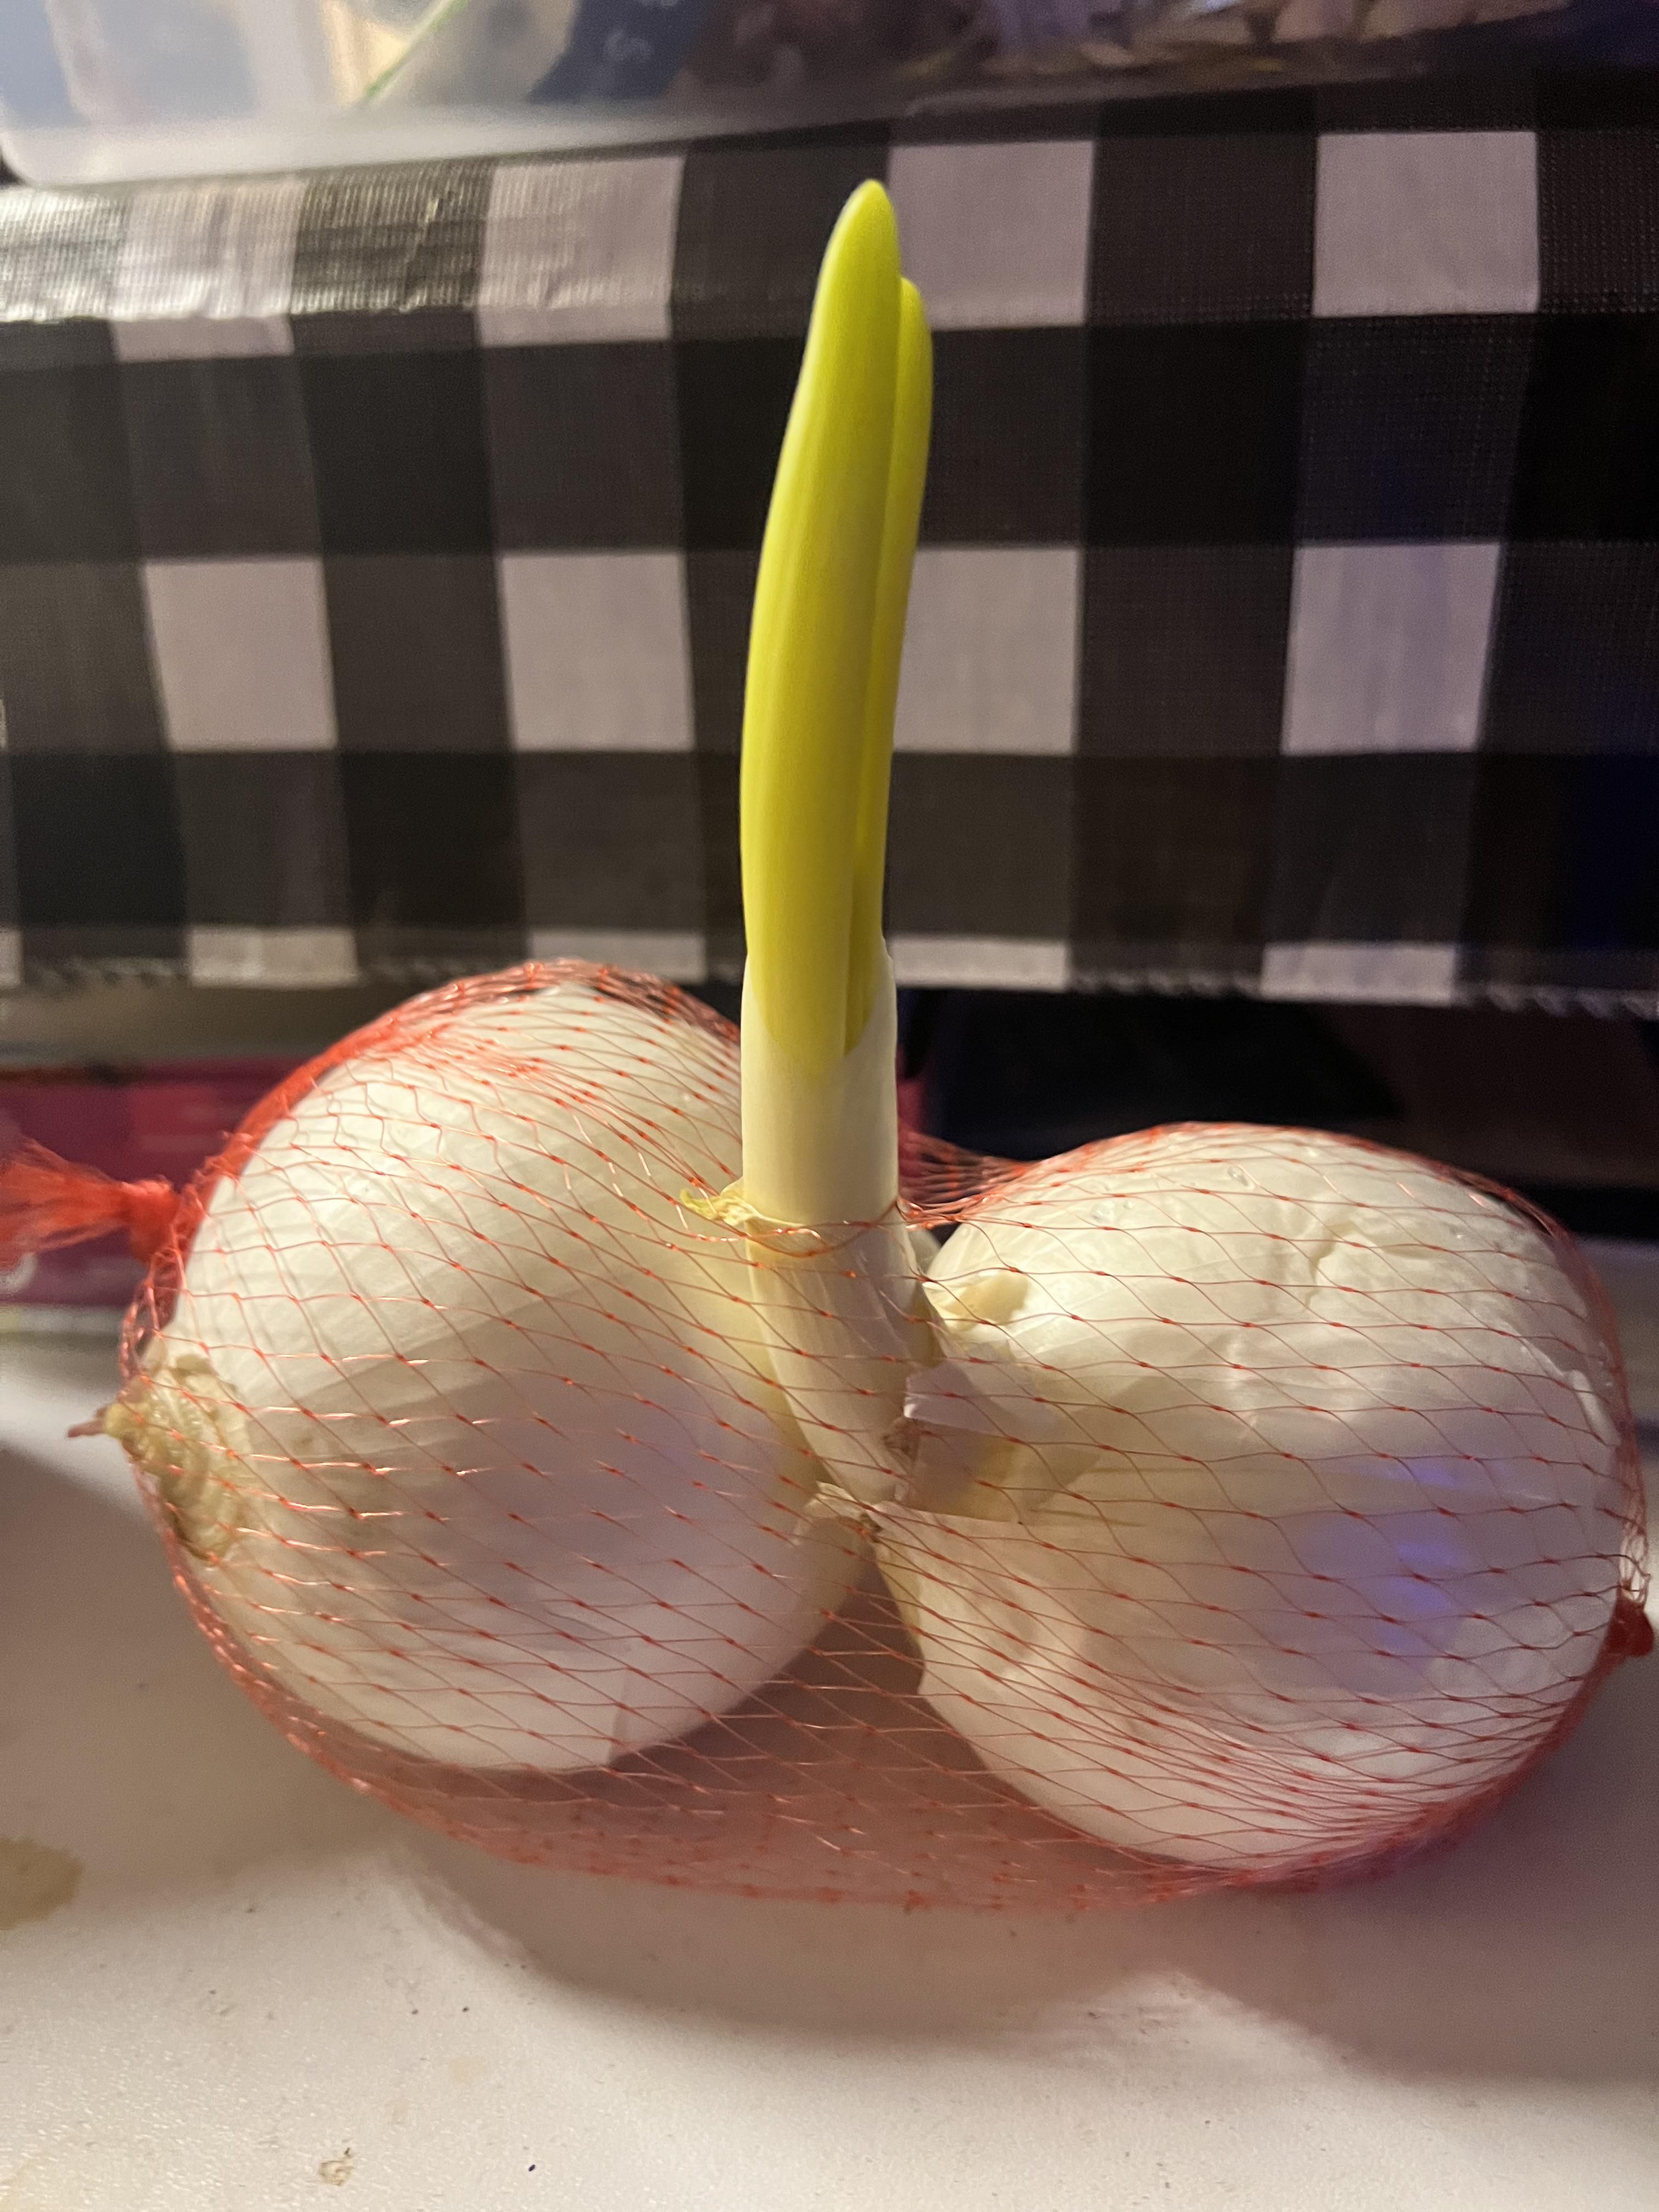 This onion is really blooming’!